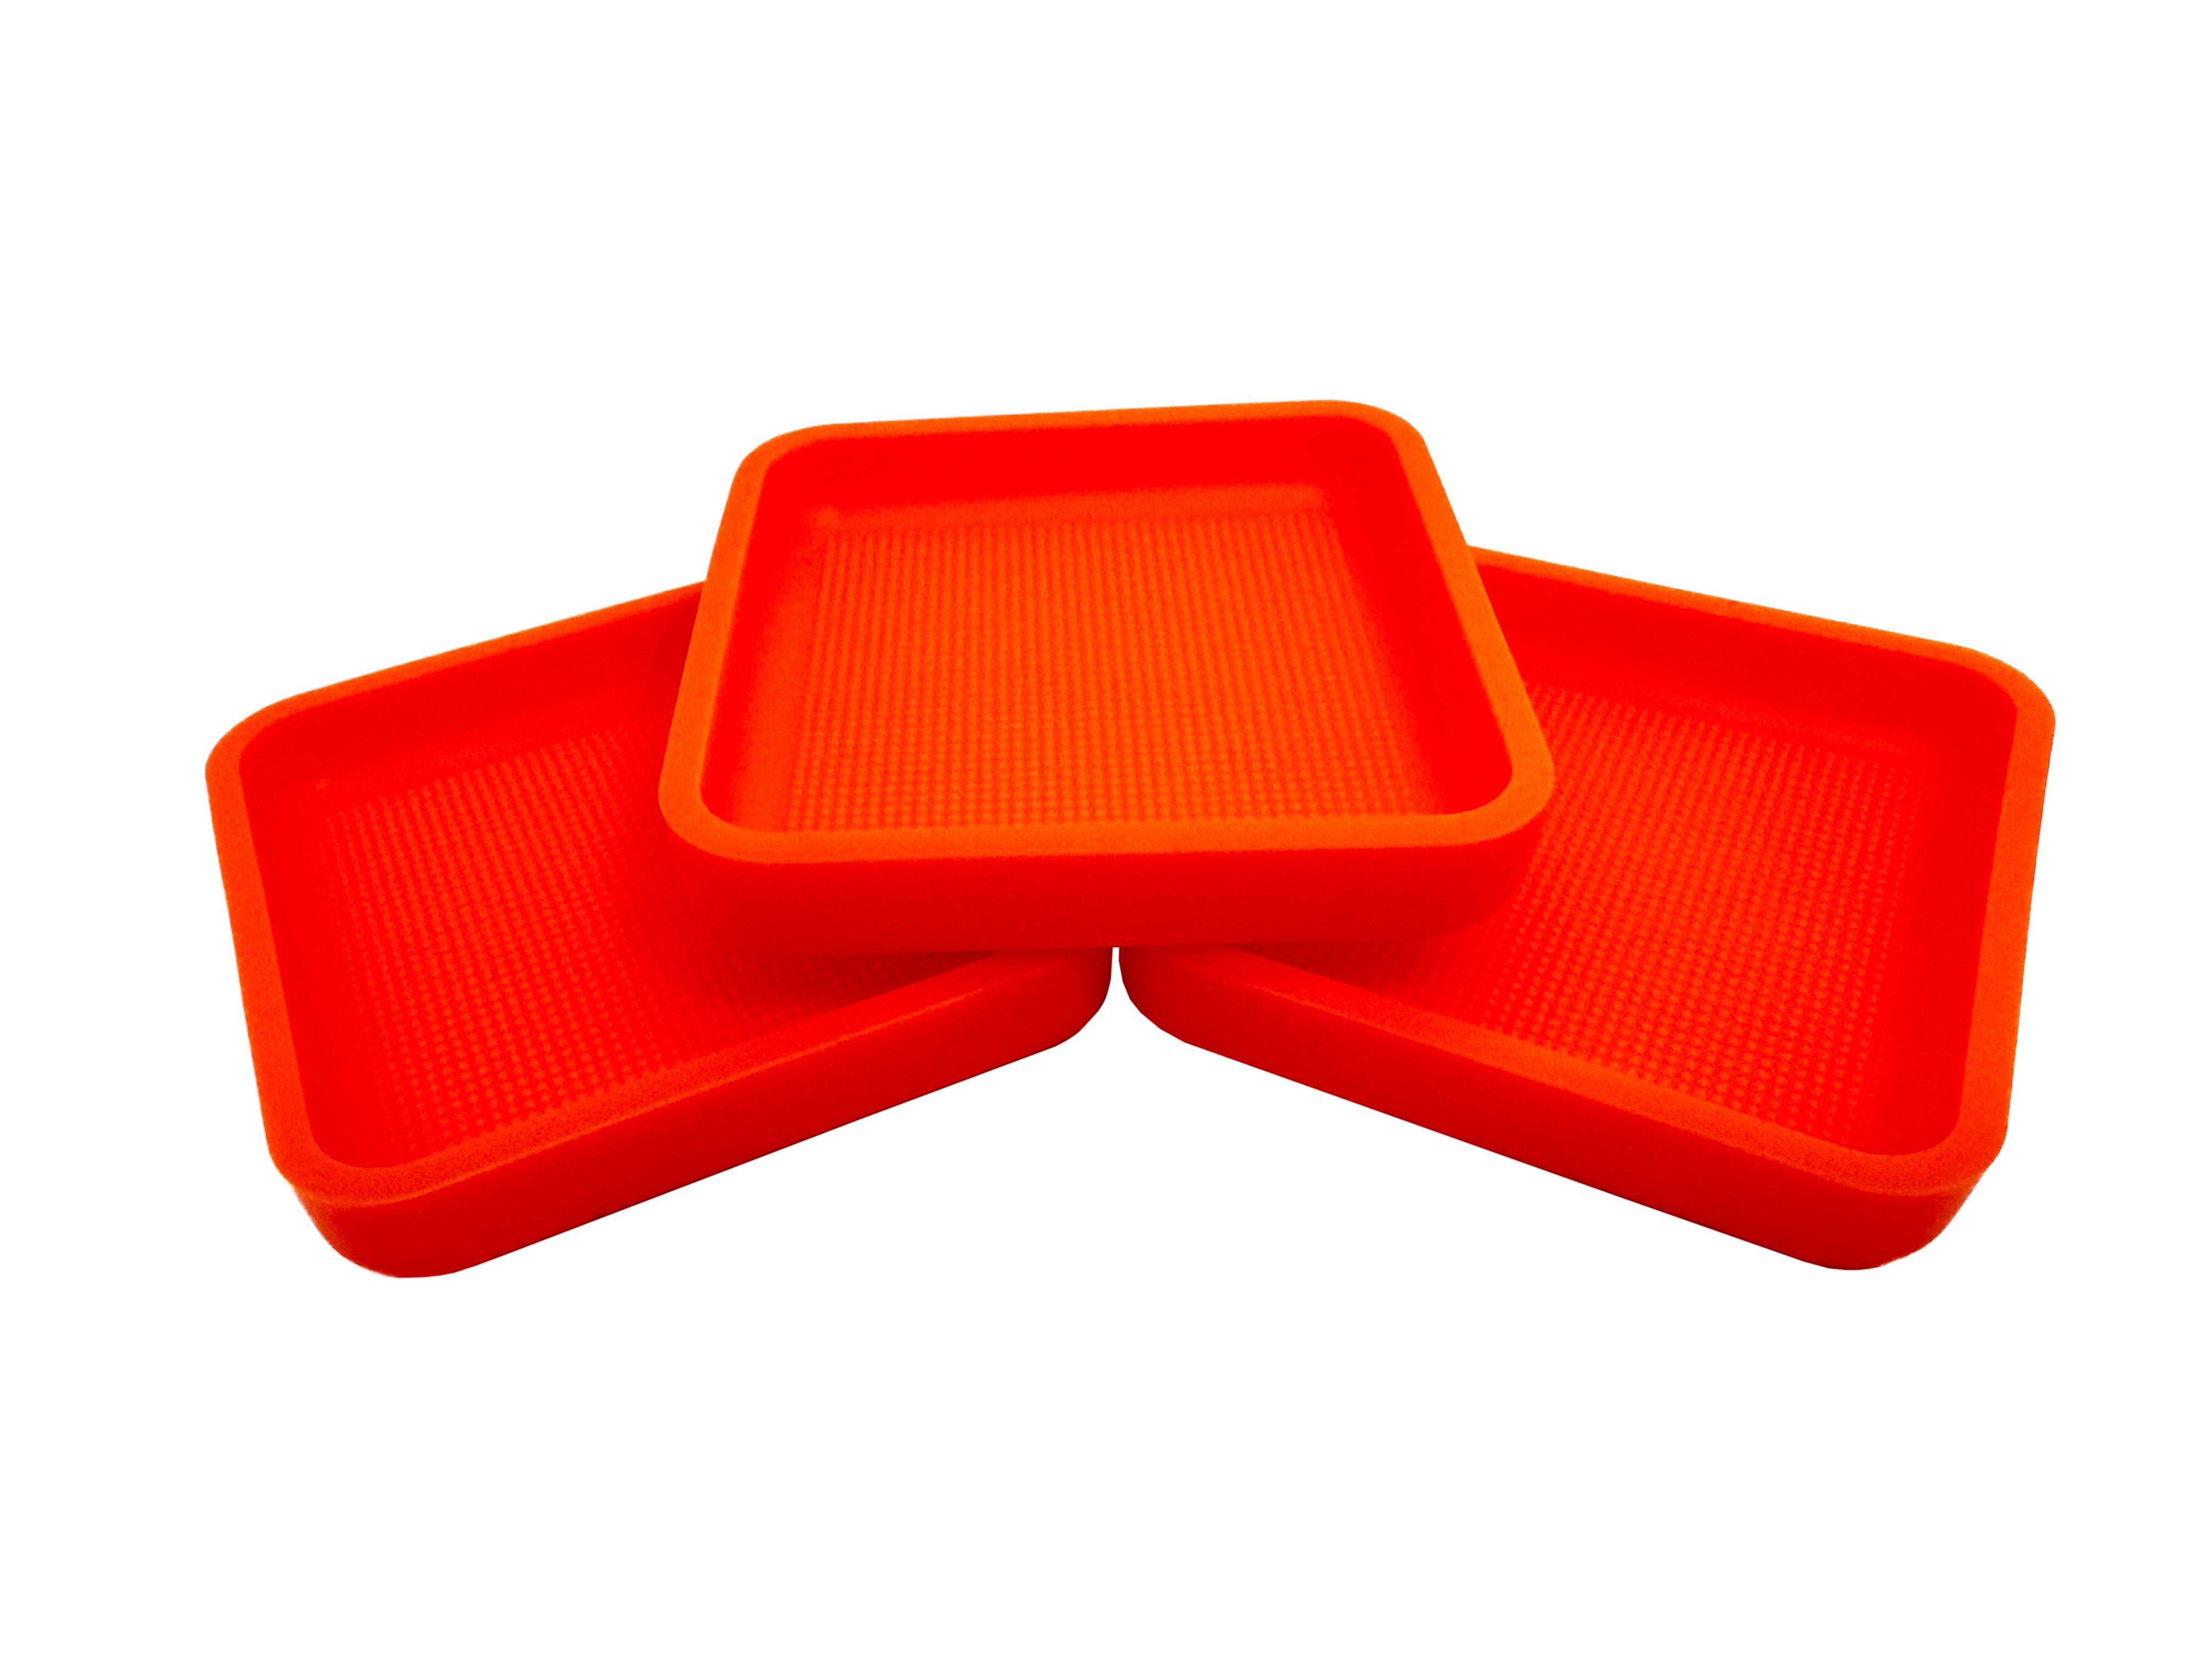 Parts Tray - Armorer - Non Slip – CountyComm